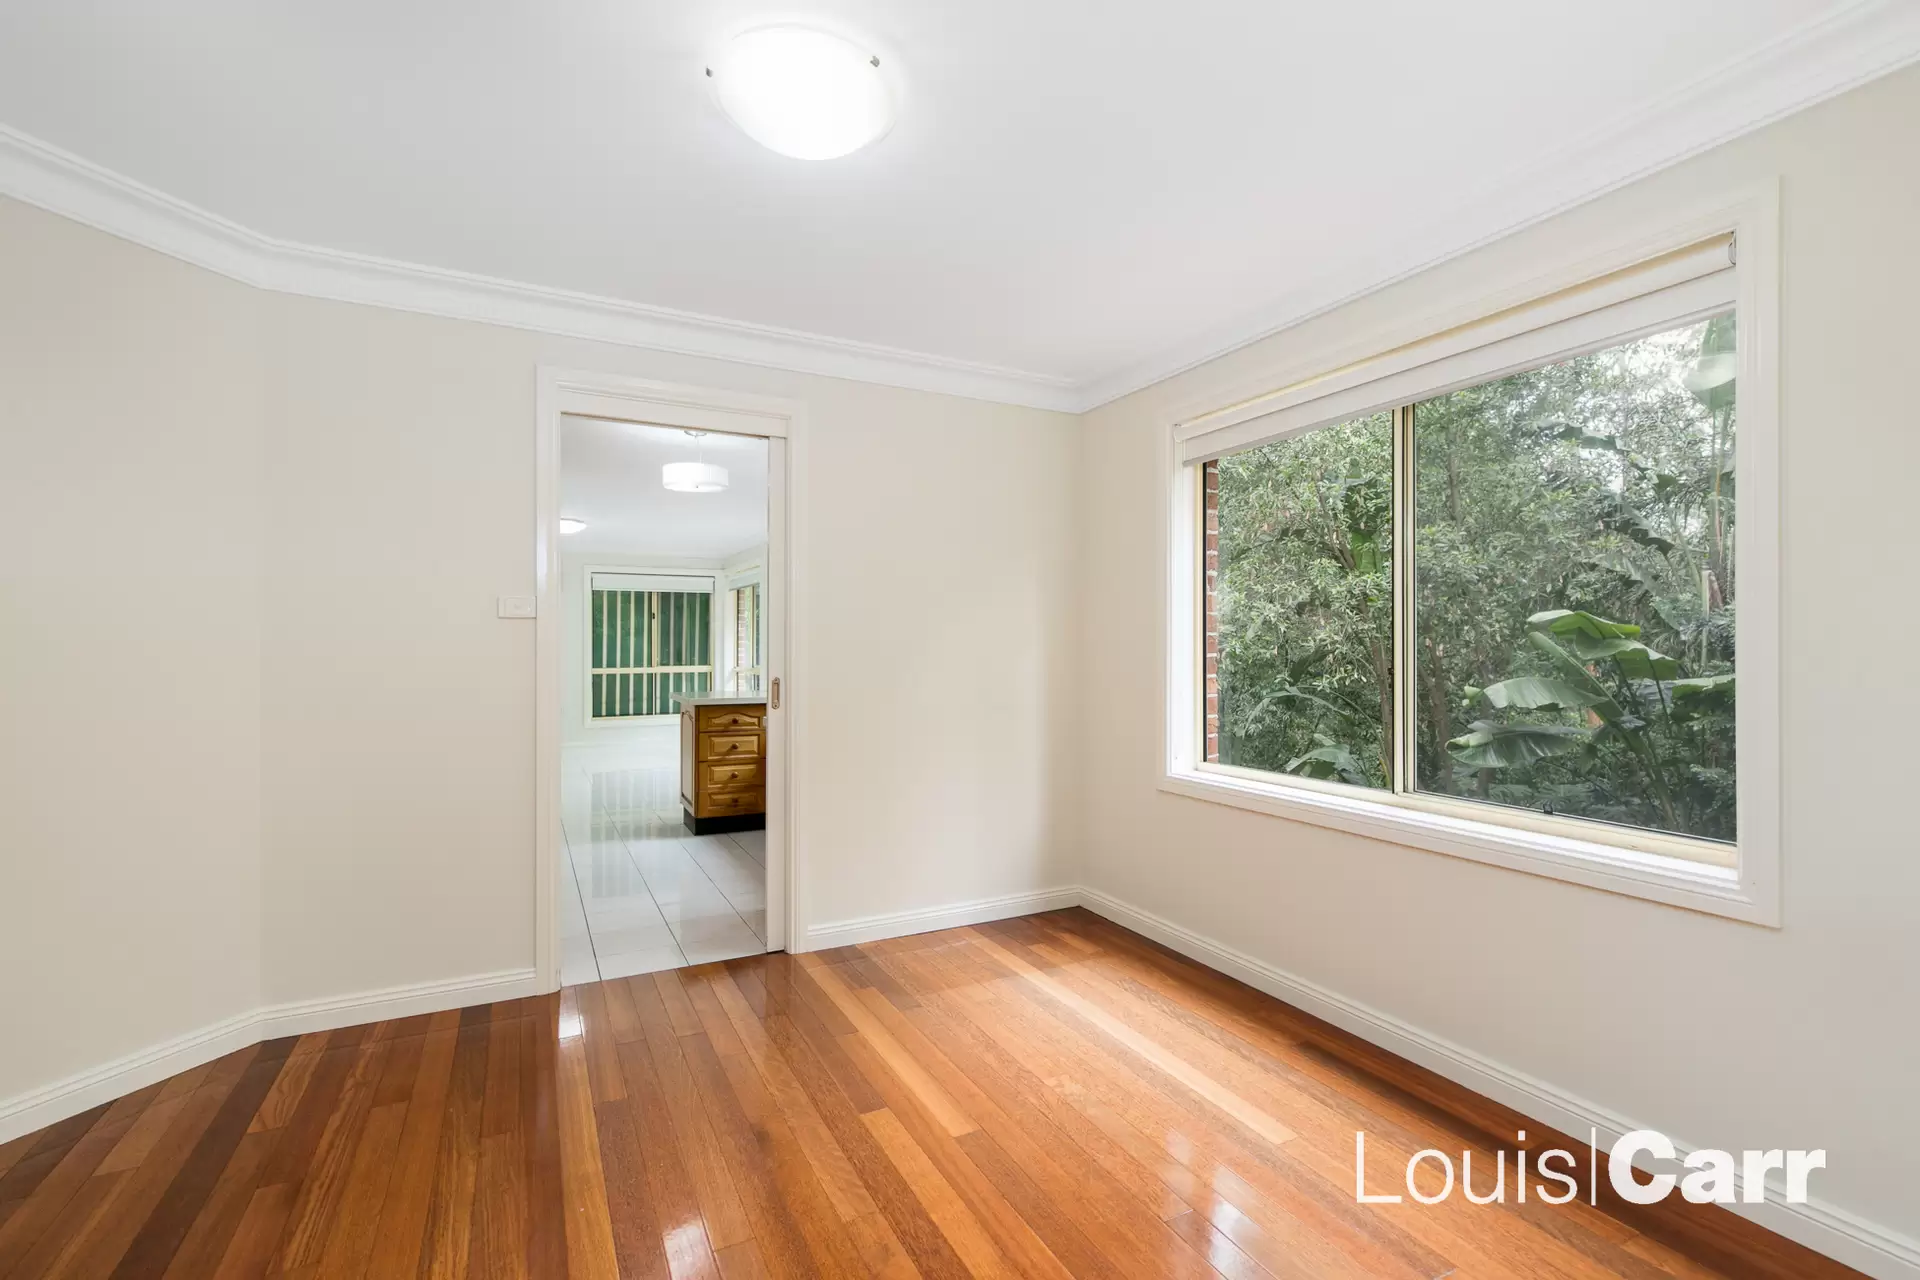 Photo #6: 2/14 Willowleaf Place, West Pennant Hills - Leased by Louis Carr Real Estate